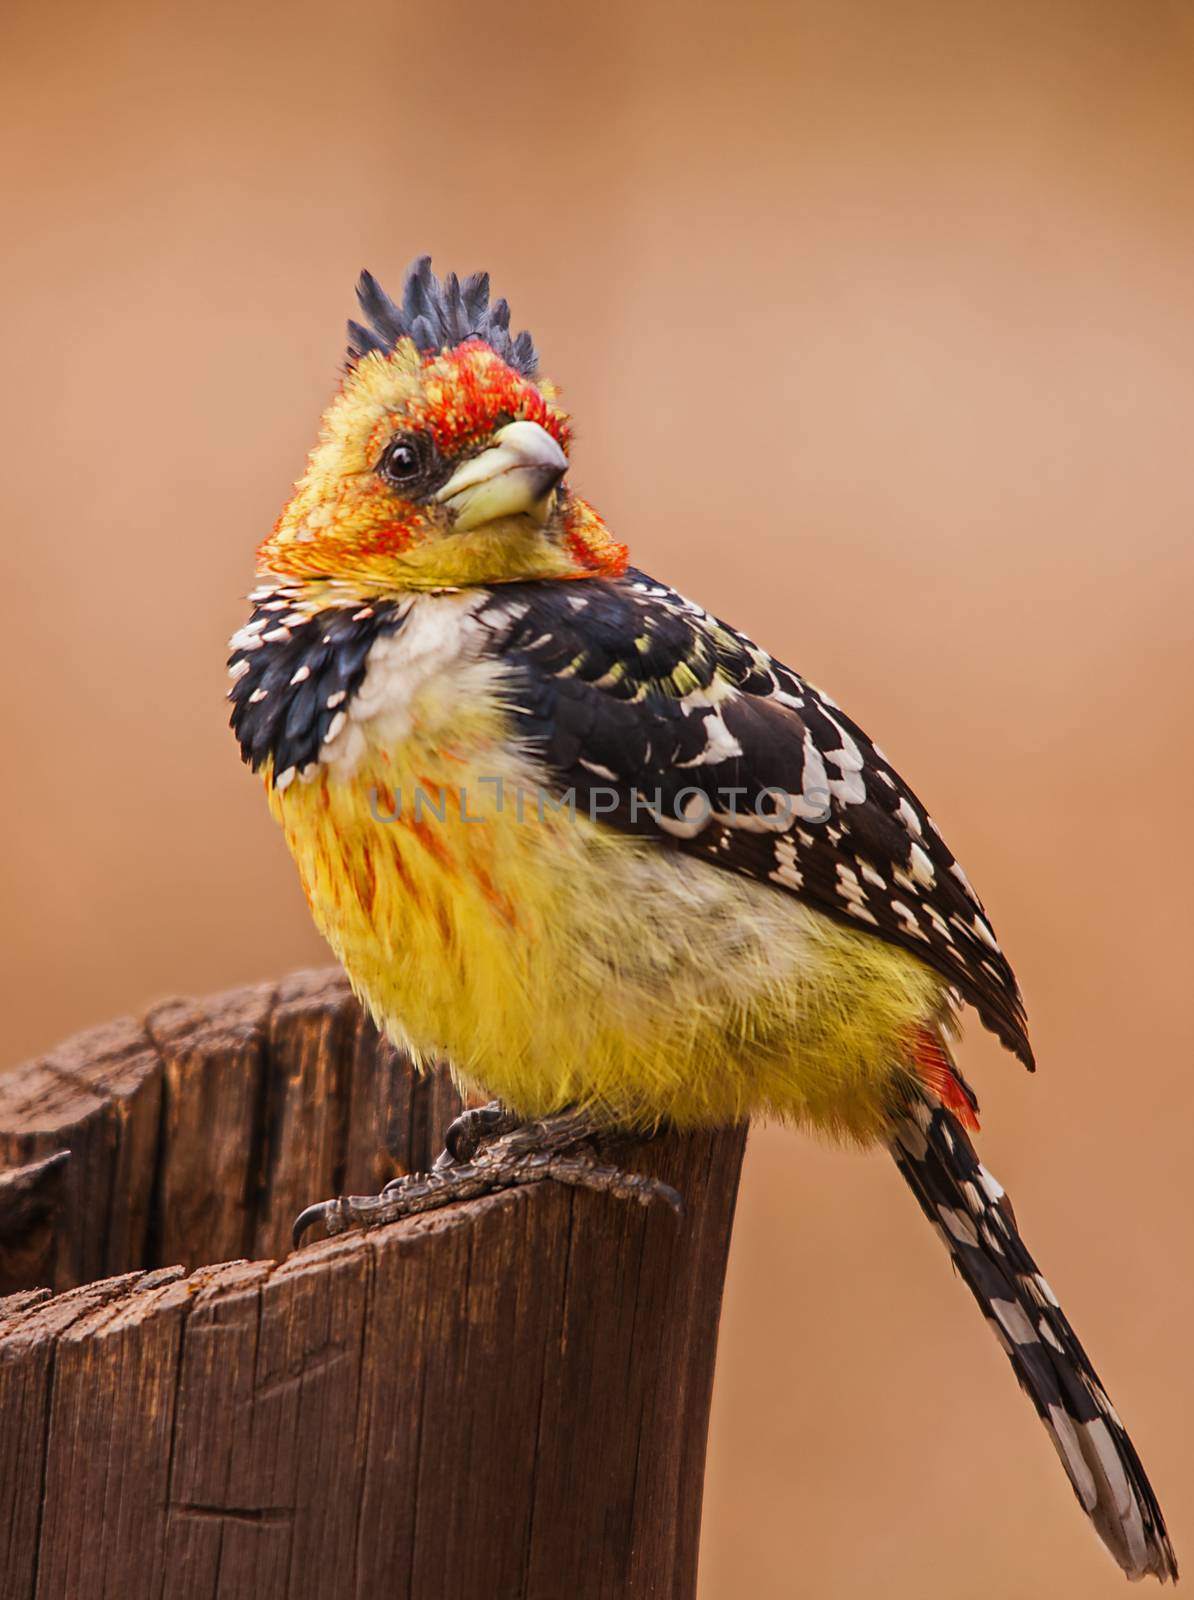 Crested Barbet by kobus_peche